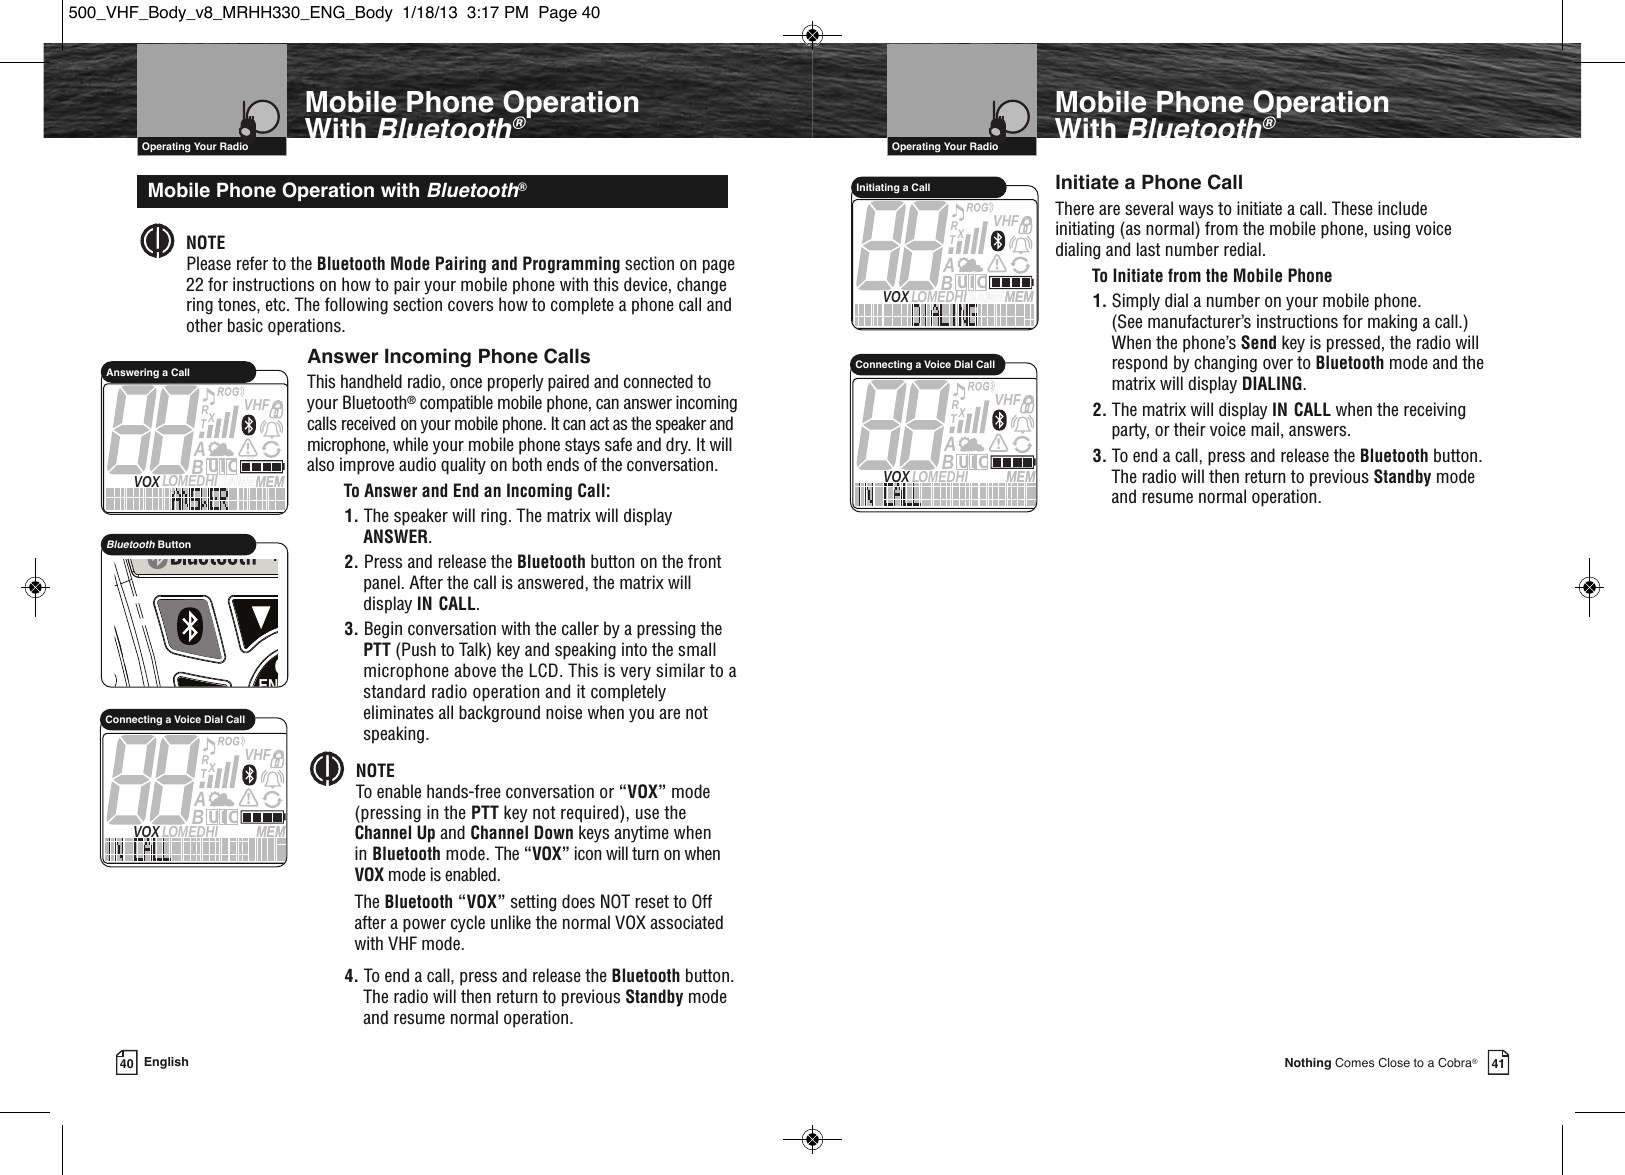 Page 23 of Cobra Electronics MRHH500 BT ACCESSORY IN MARINE RADIO User Manual MRHH330 ENG Body